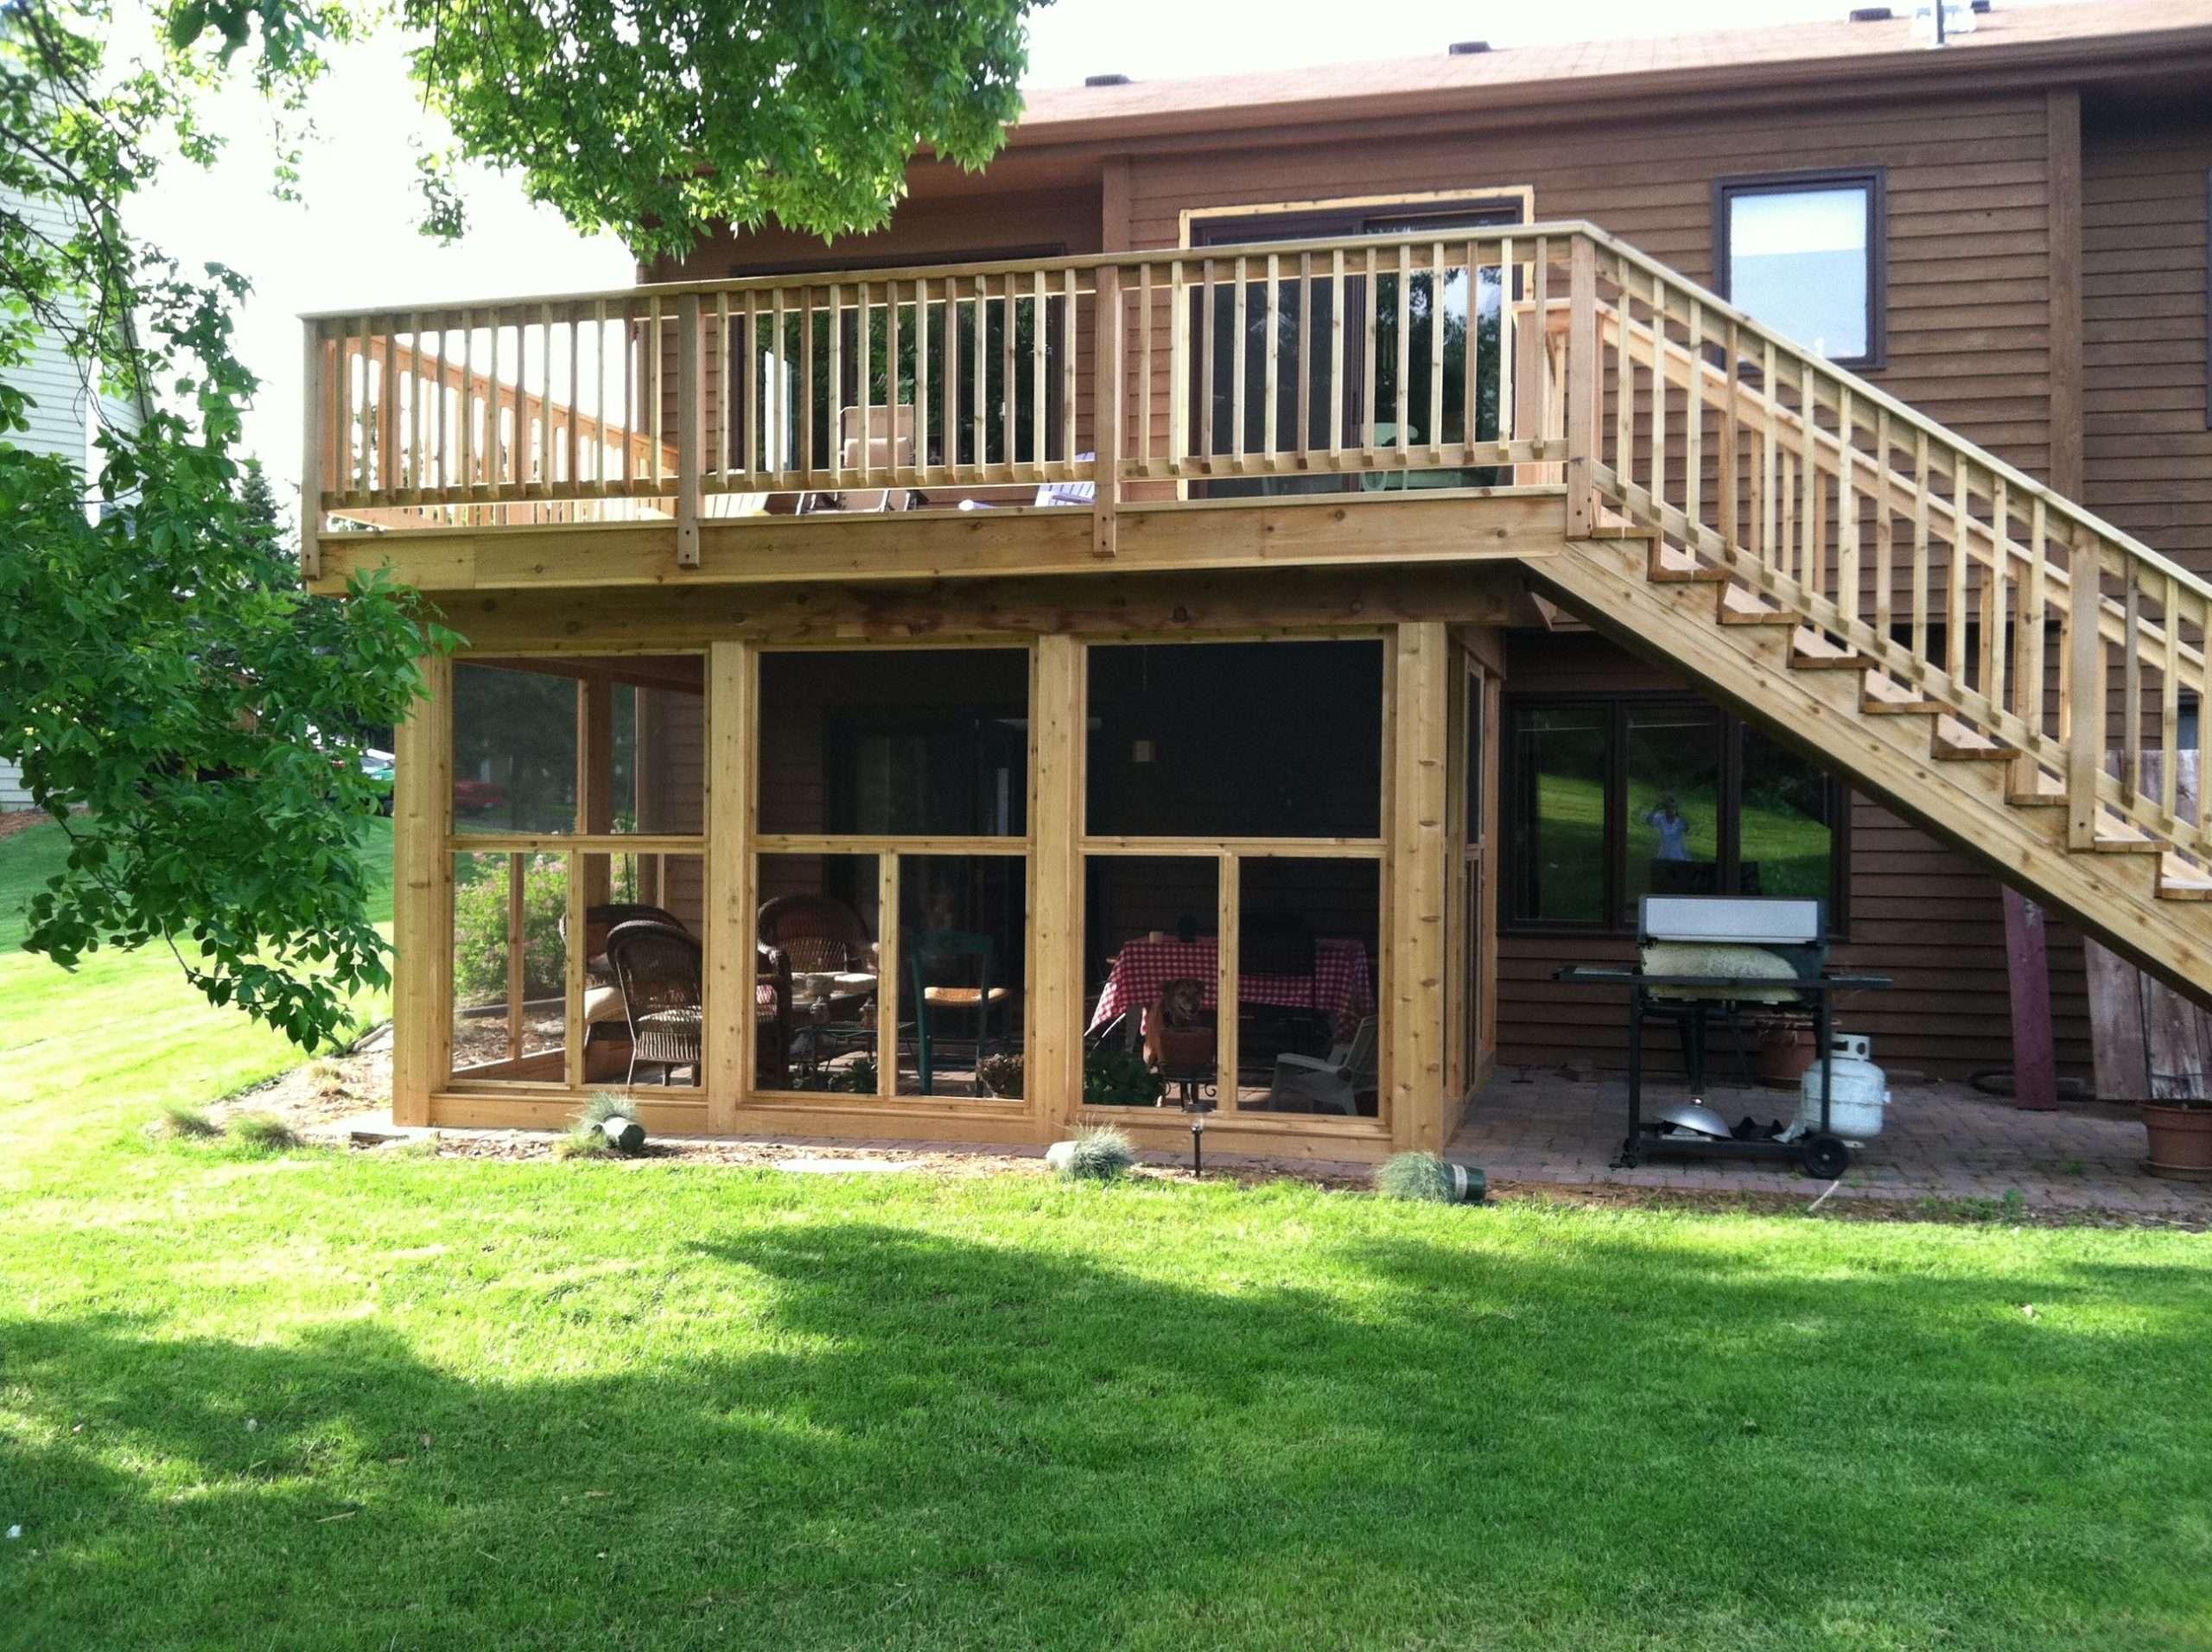 A great screened in porch under the deck